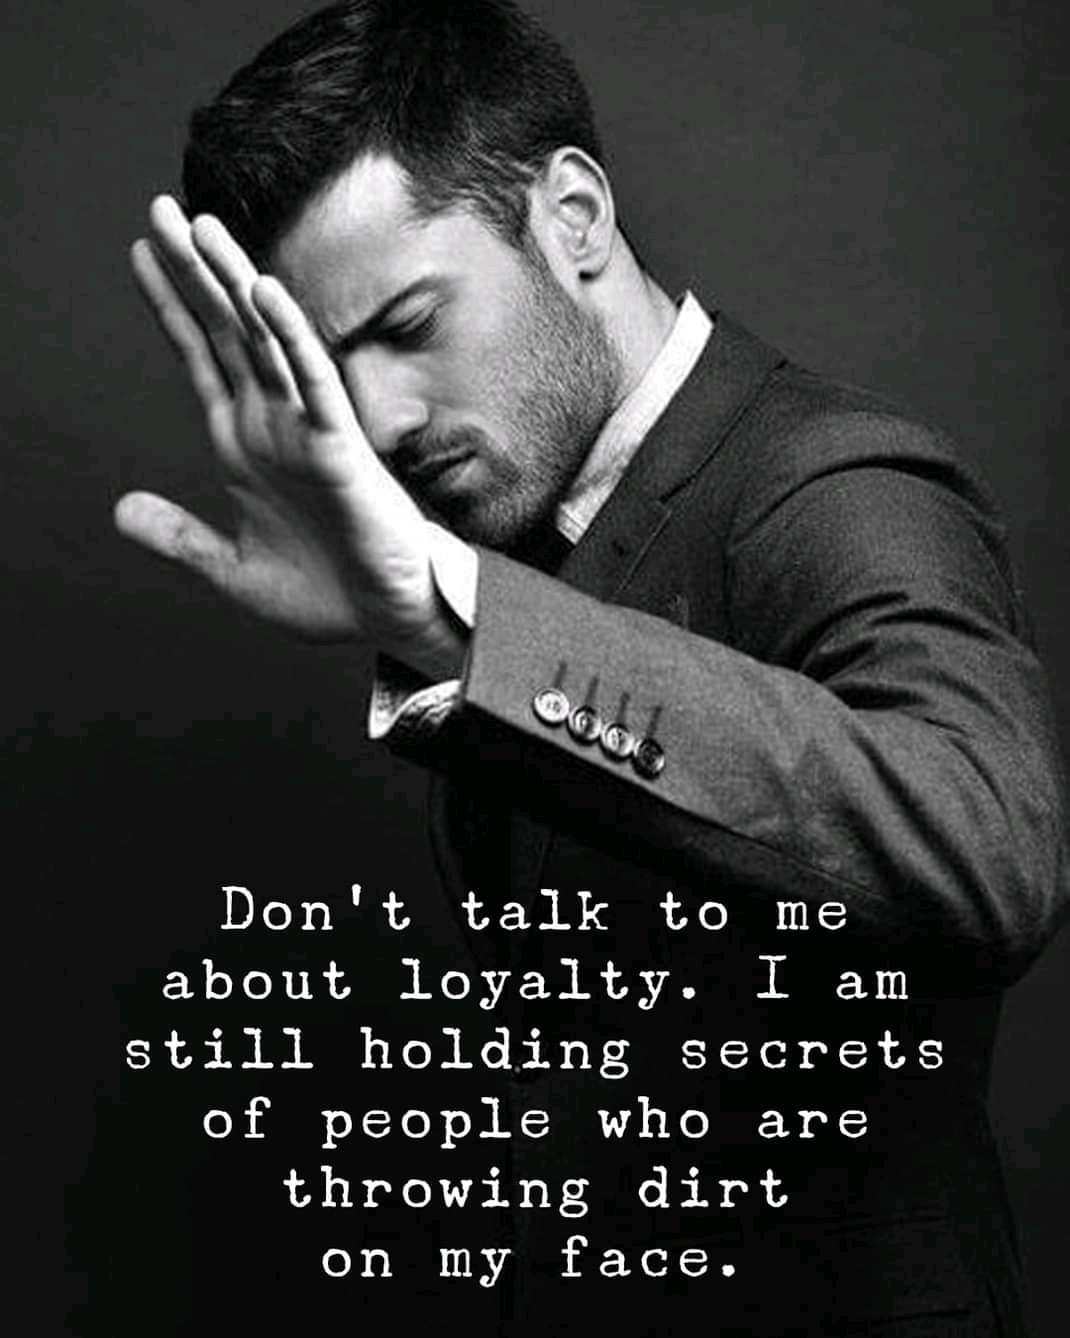 Don’t talk to me about loyalty,I’m still holding secrets for people who are throwing dirt on my name.